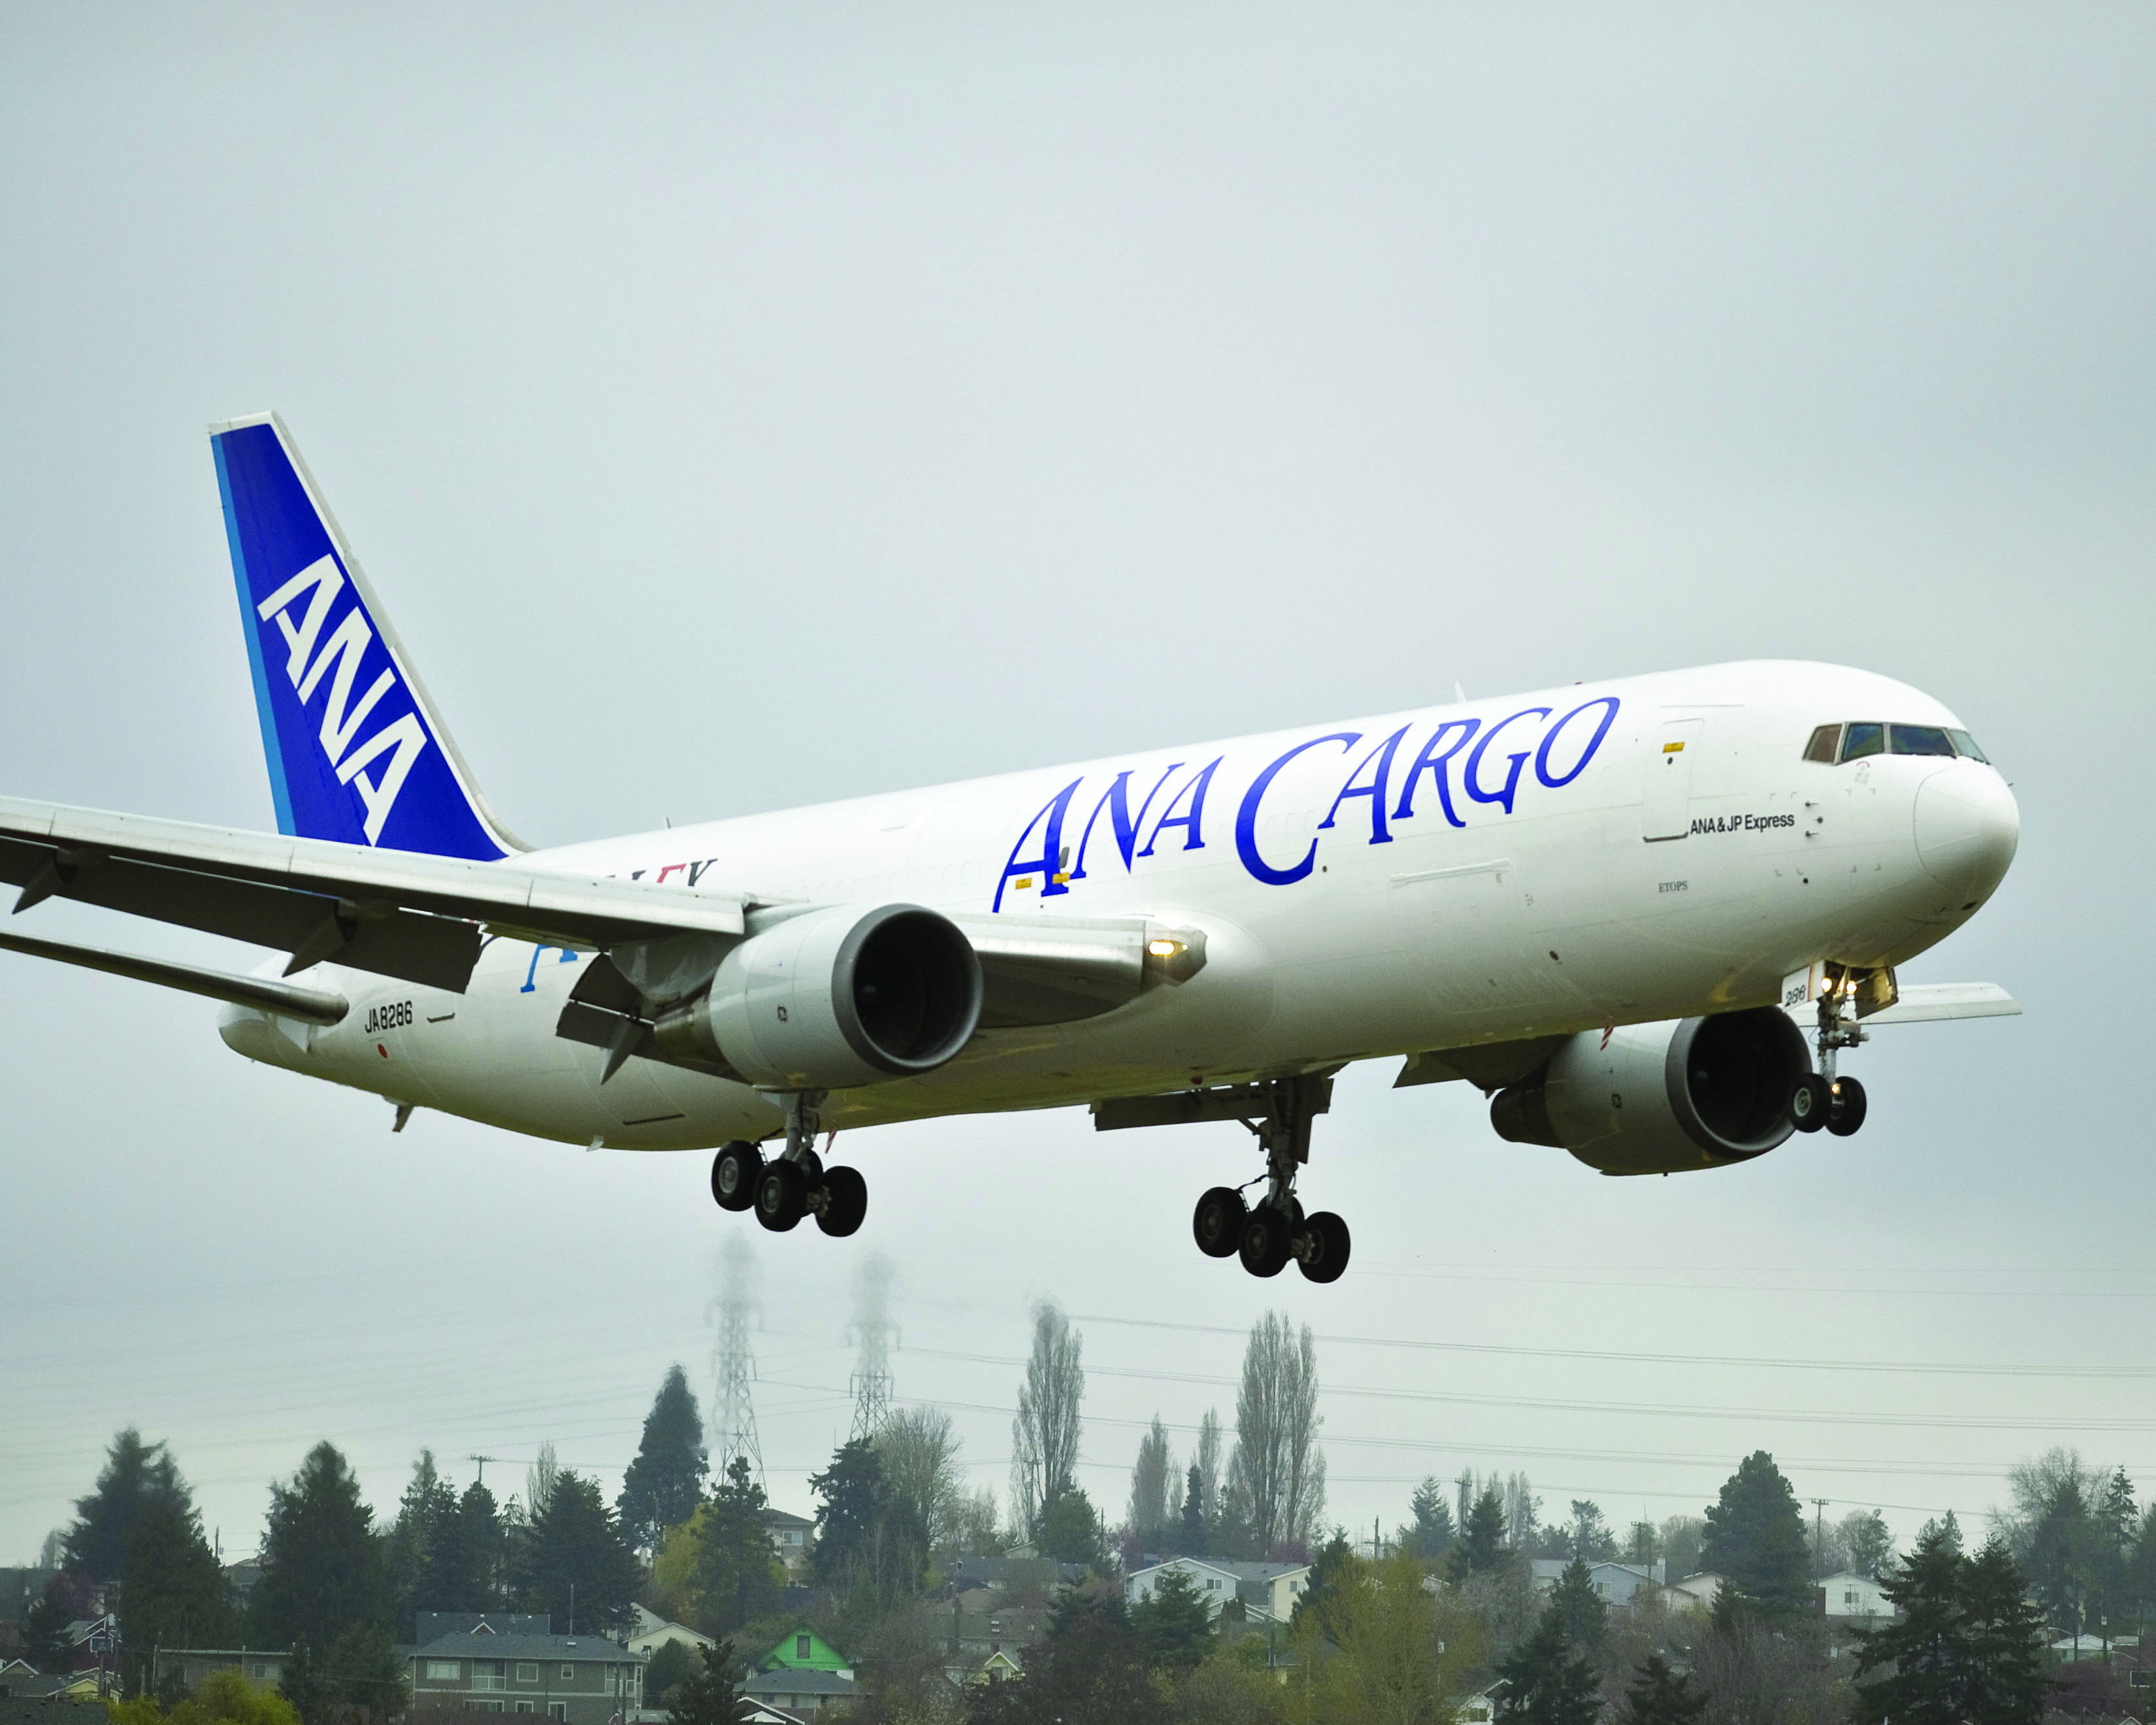 ANA has B767 conversion options for freighter fleet expansion